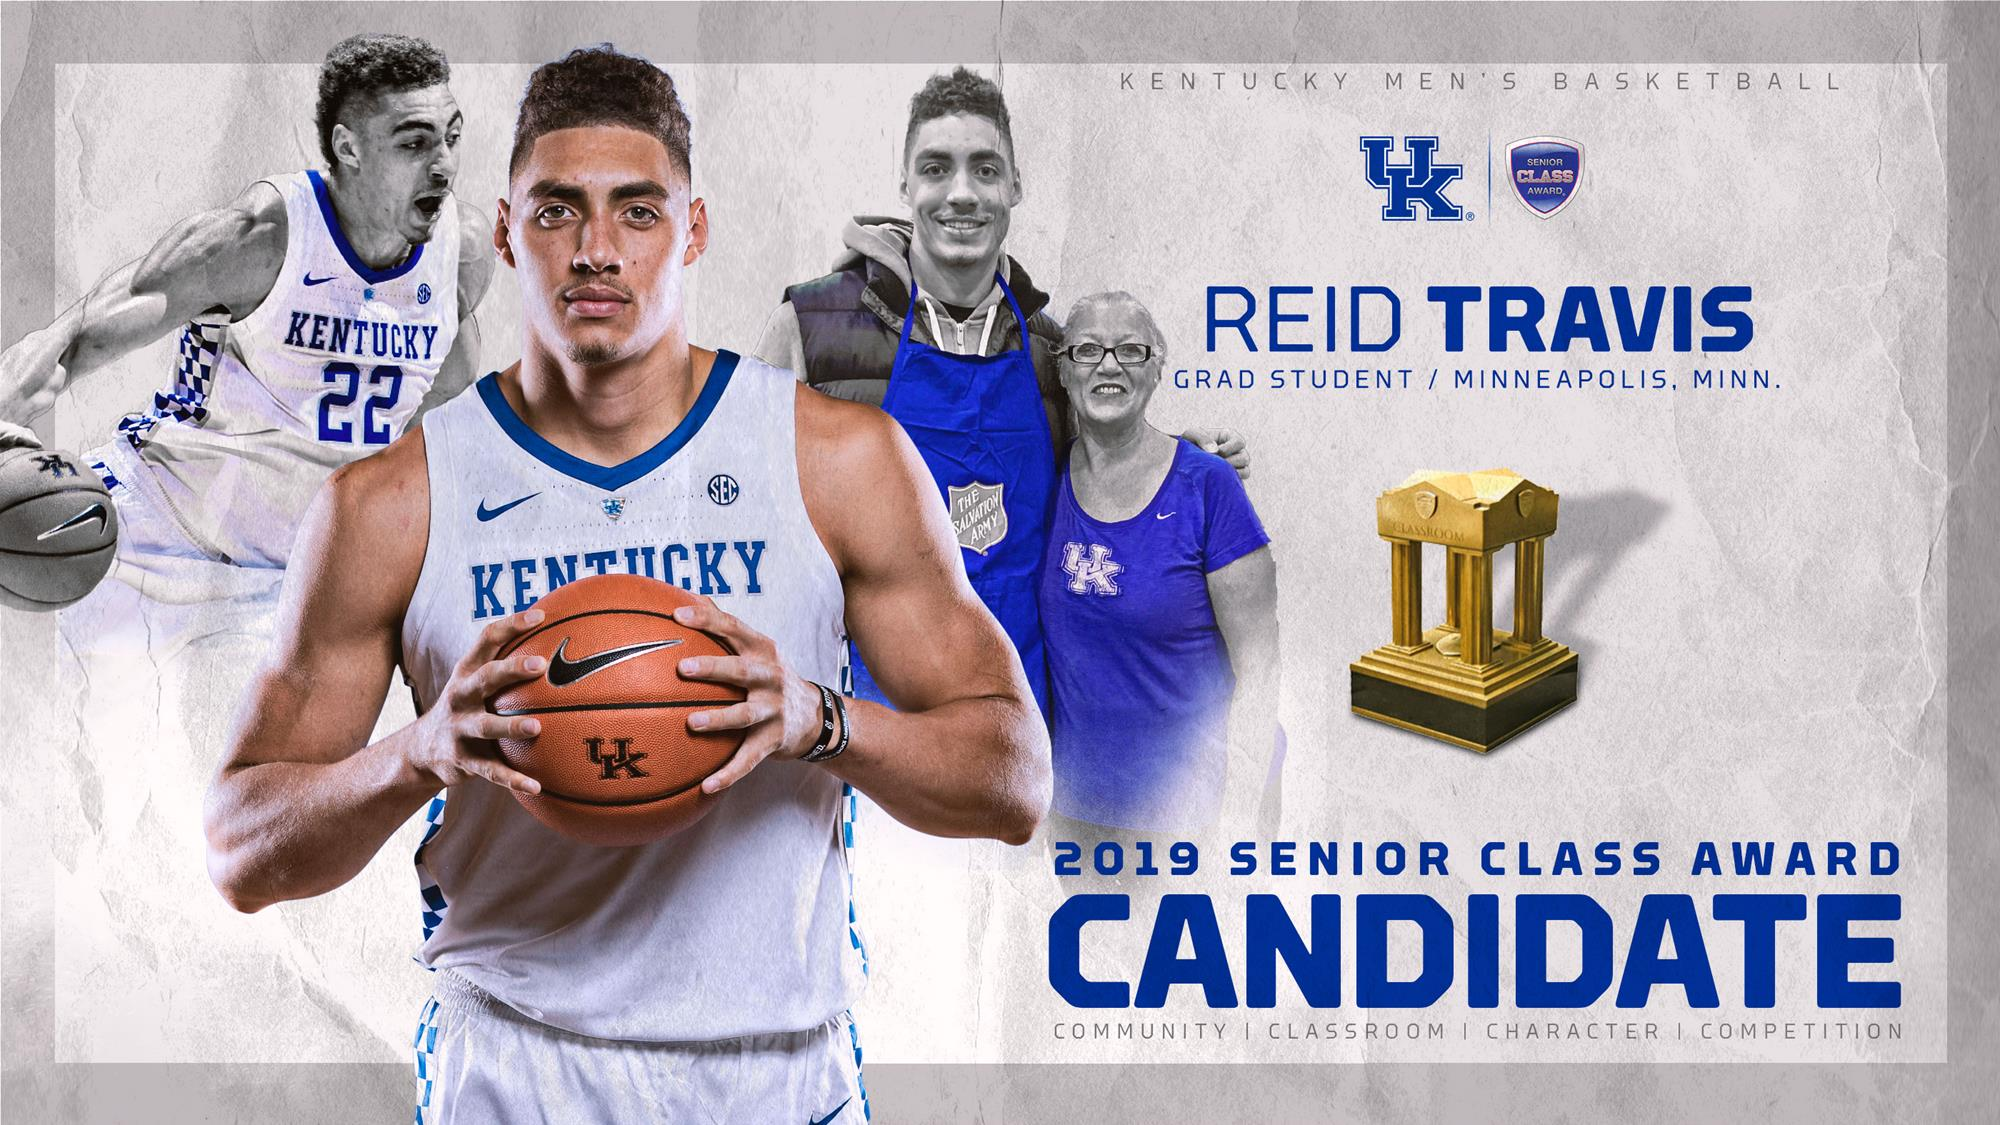 Reid Travis a Candidate for the Senior CLASS Award